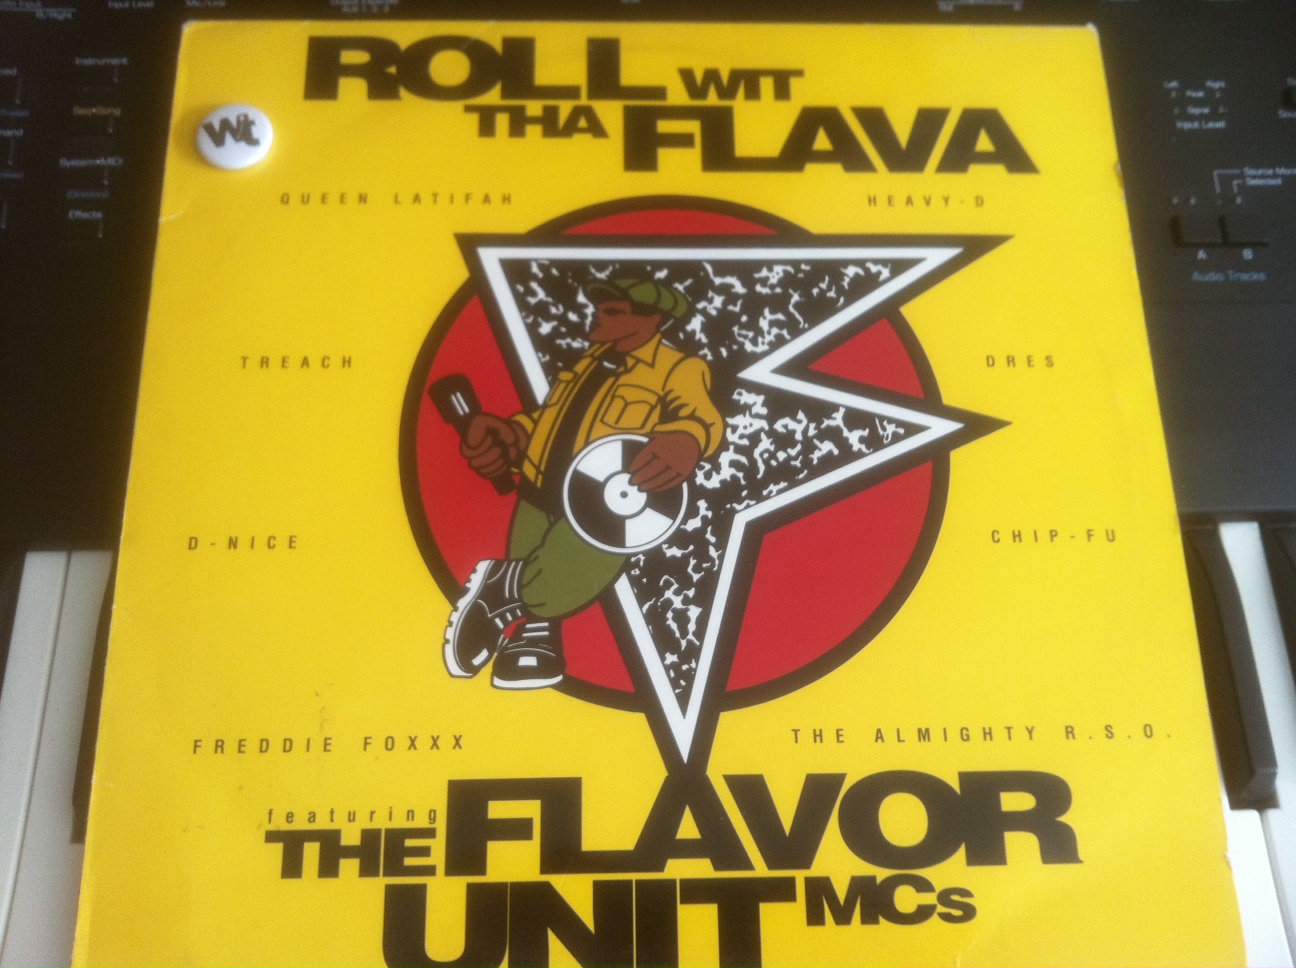 Ladata Flavor Unit MC's - Roll With Tha Flava (Extended)